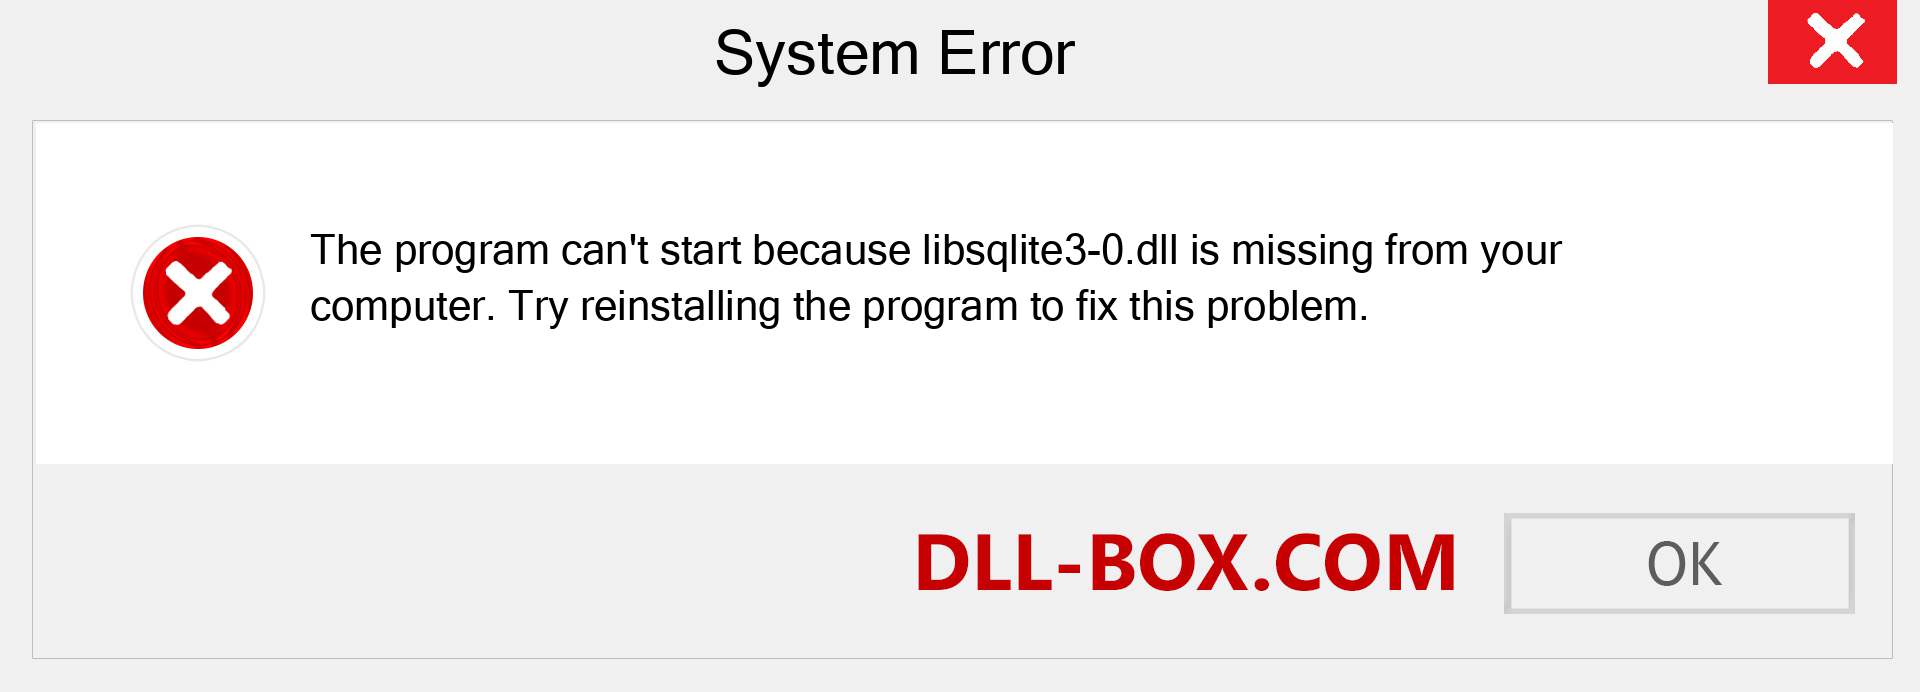  libsqlite3-0.dll file is missing?. Download for Windows 7, 8, 10 - Fix  libsqlite3-0 dll Missing Error on Windows, photos, images